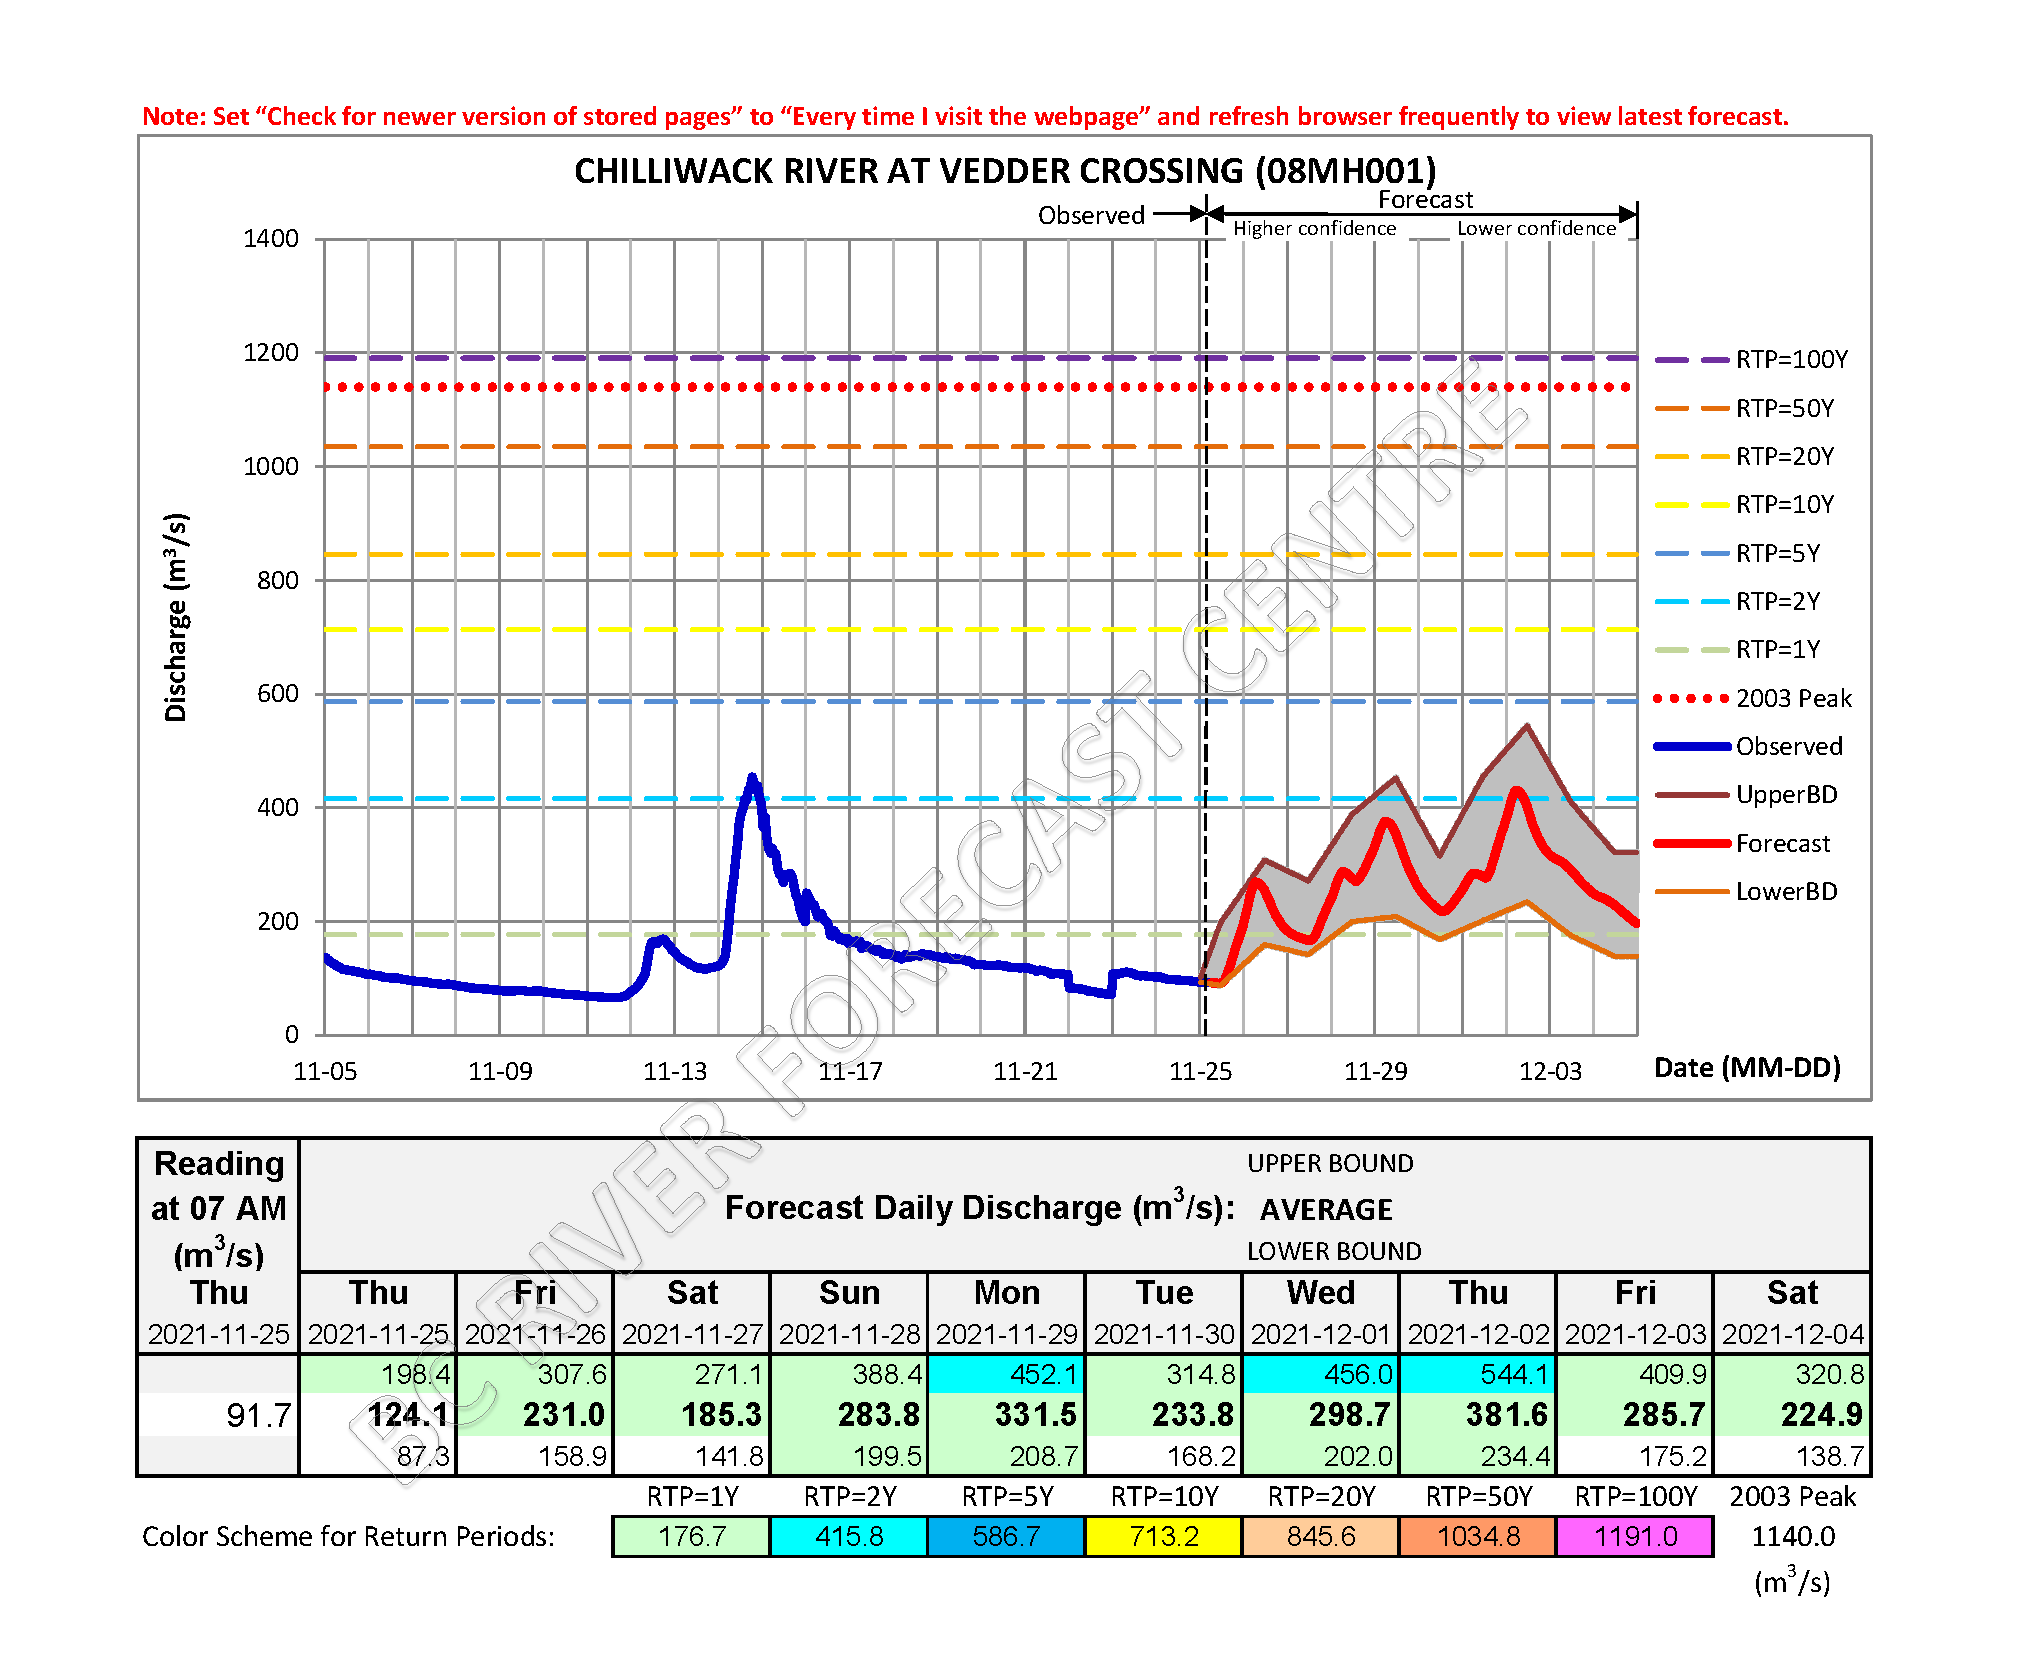 A graph showing the BC River Centre Forecast for Chilliwack River at Vedder Crossing